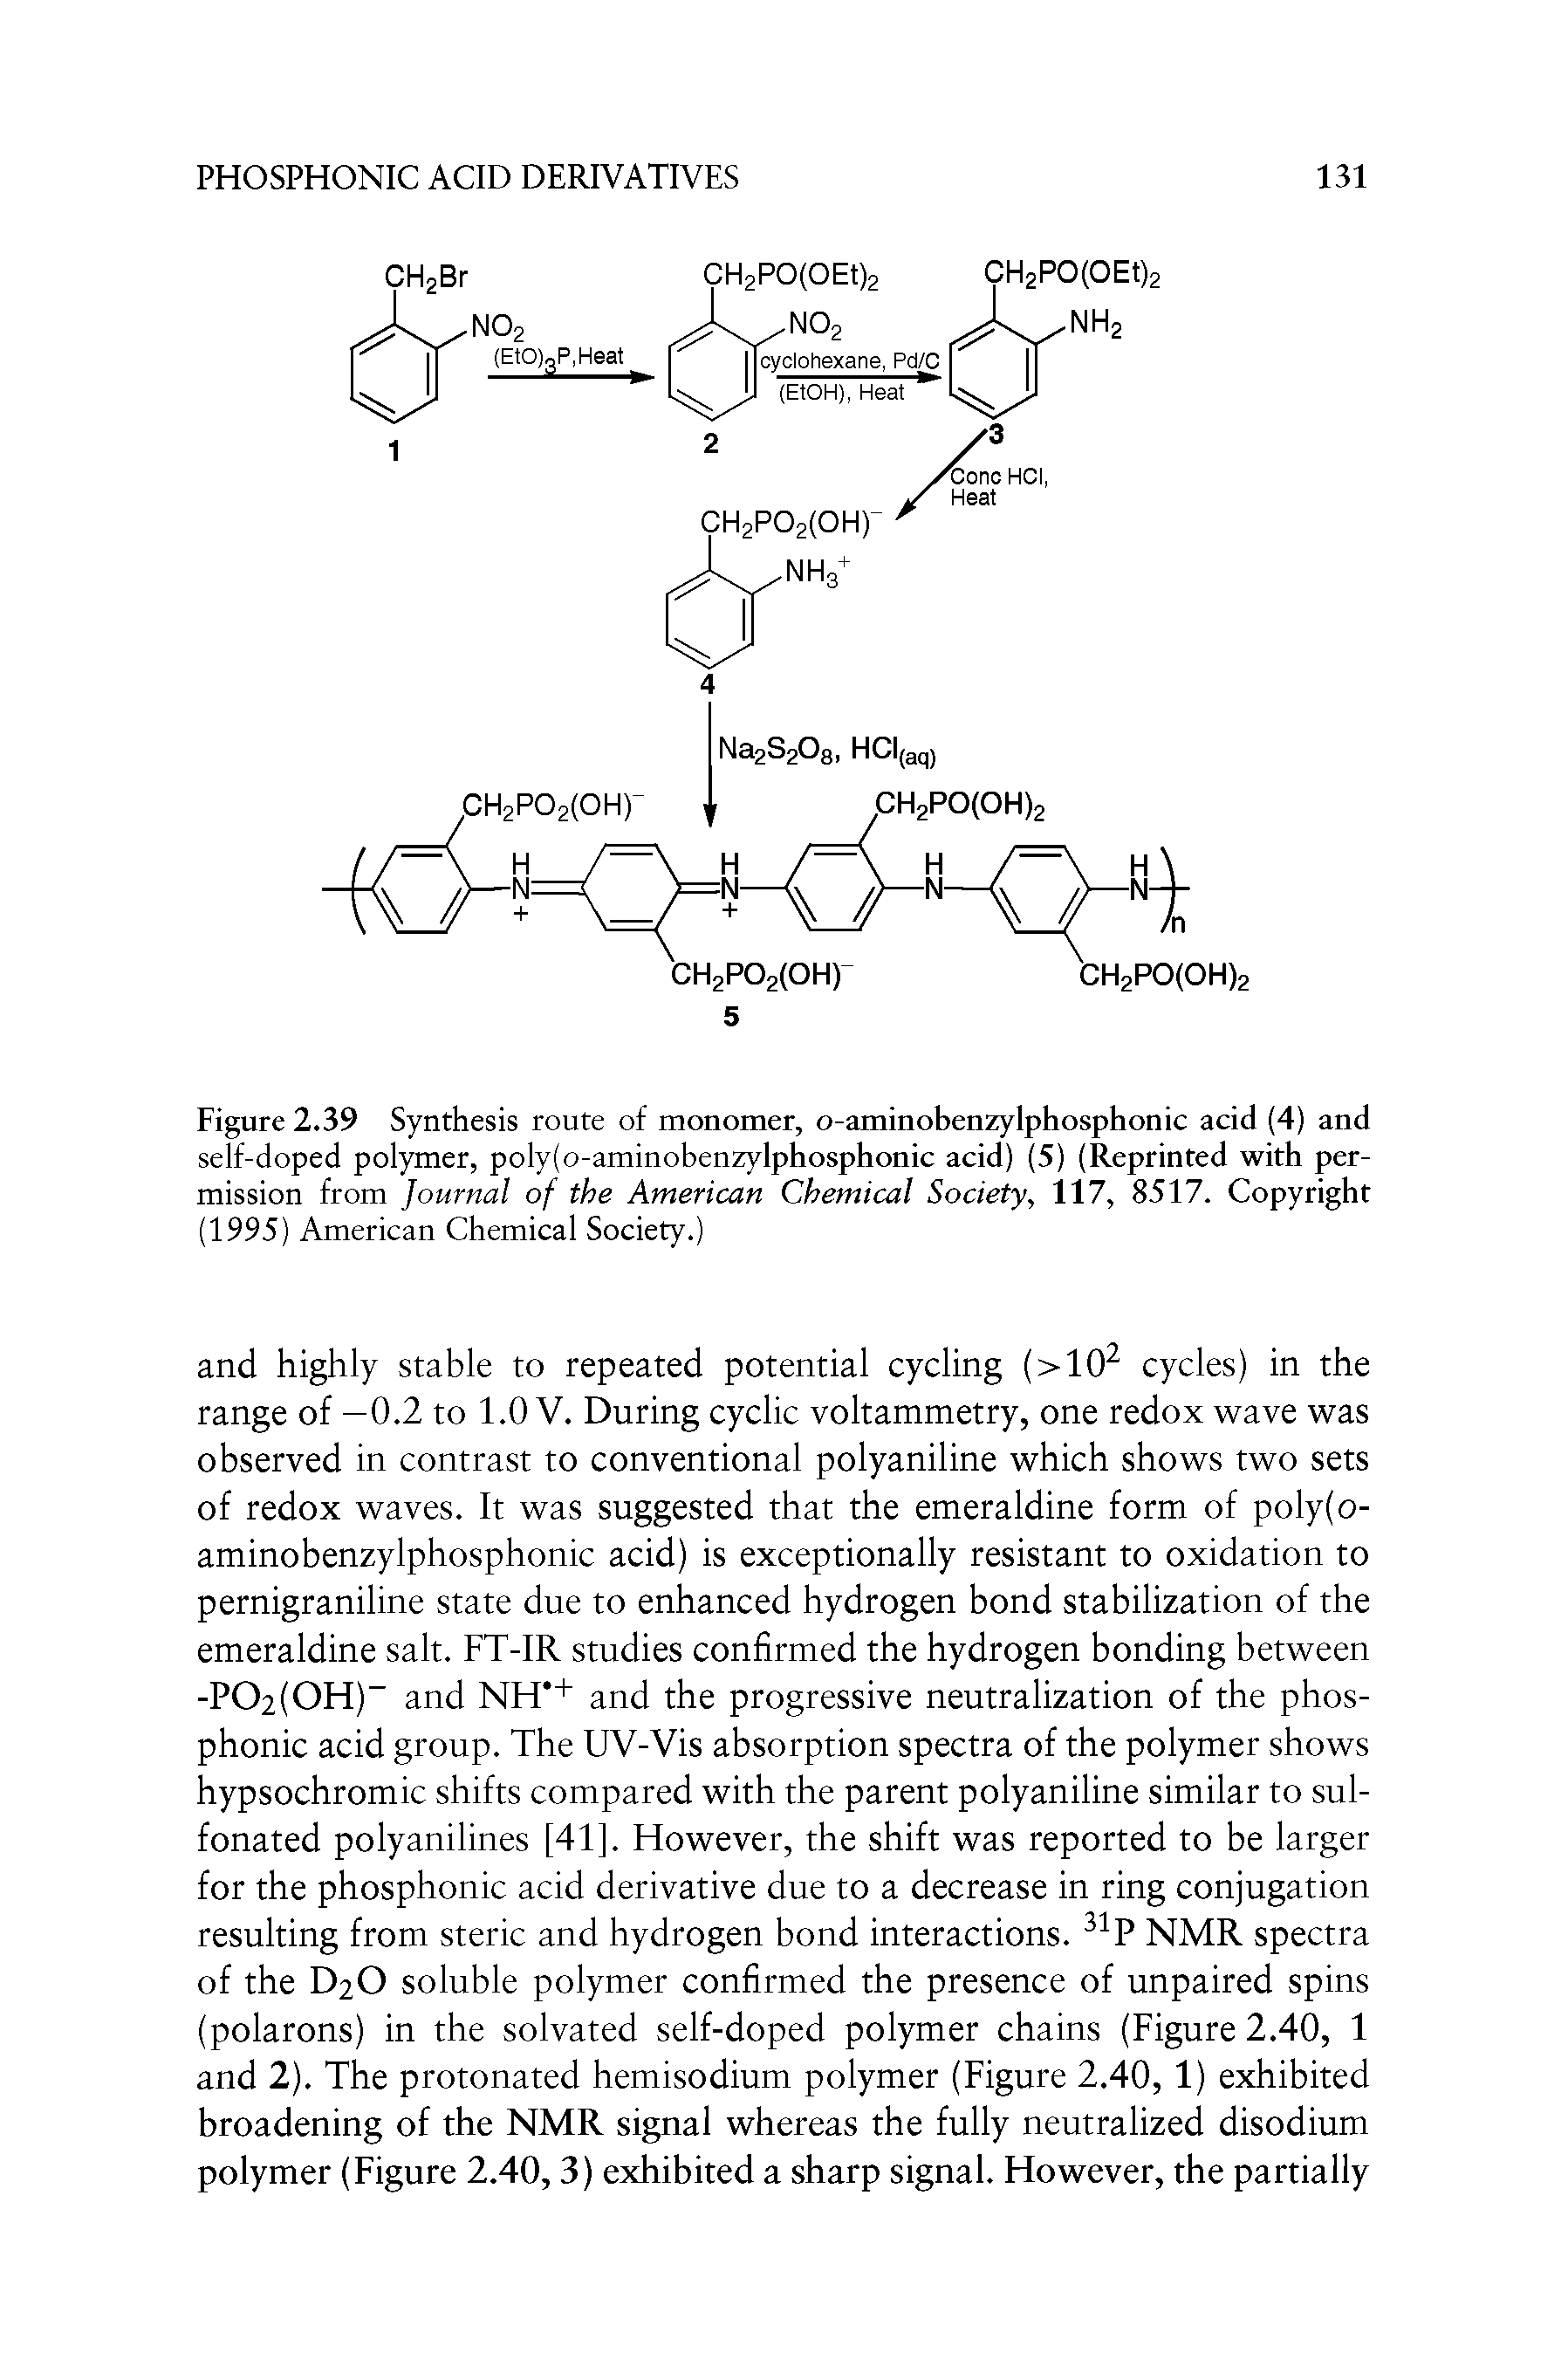 Figure 2.39 Synthesis route of monomer, o-aminobenzylphosphonic acid (4) and self-doped polymer, poly(o-aminobenzylphosphonic acid) (5) (Reprinted with permission from Journal of the American Chemical Society, 117, 8517. Copyright (1995) American Chemical Society.)...